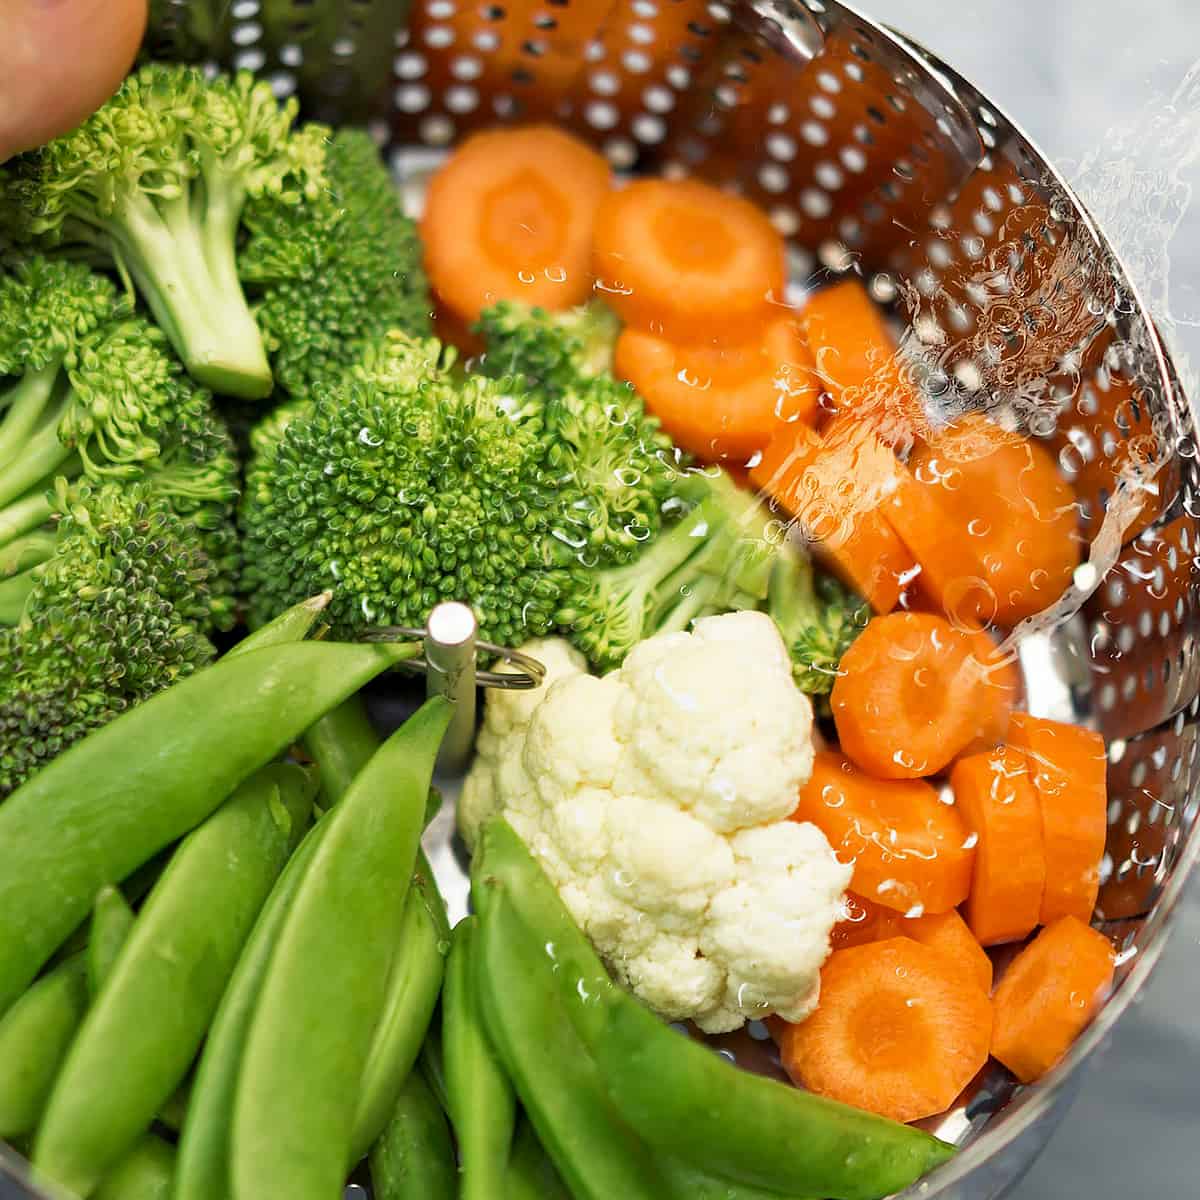 How to Blanch Vegetables for Dehydrating, Freezing or Freeze Drying